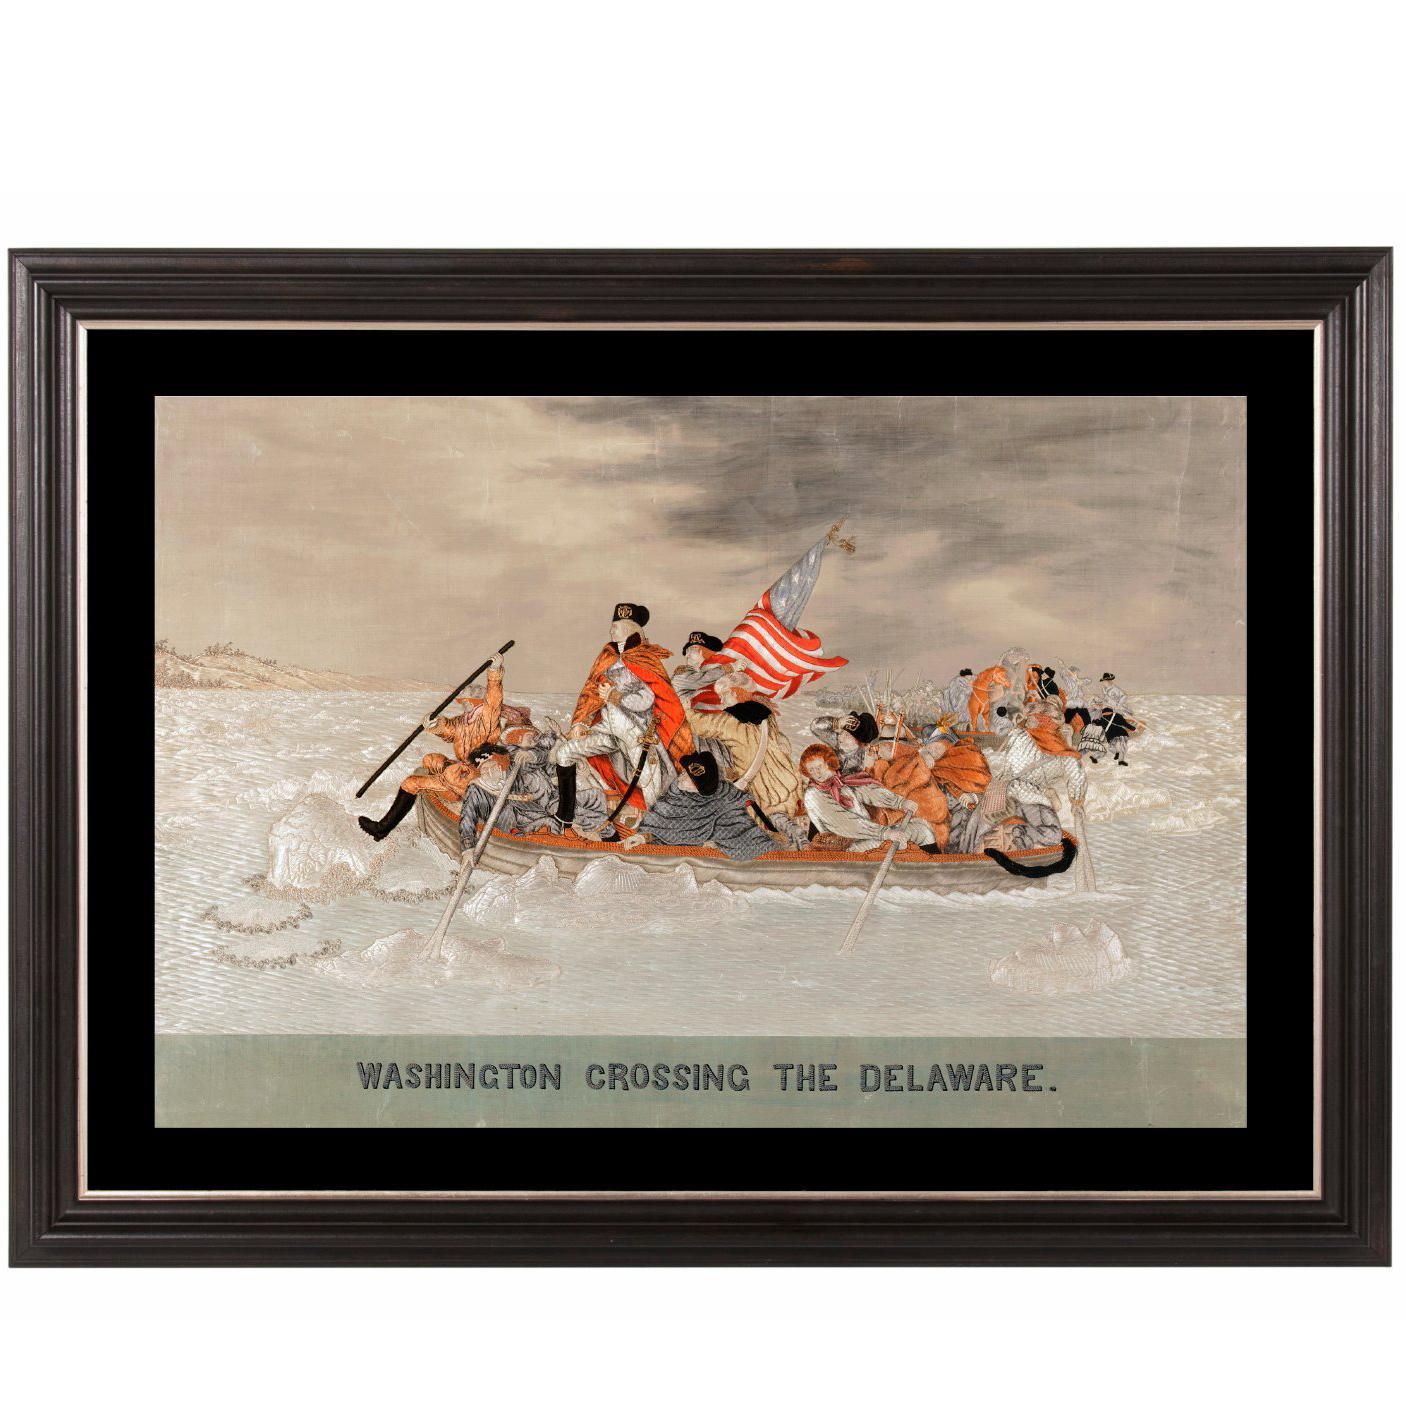 "Washington Crossing the Delaware" Embroidery with a Trapunto Needlework